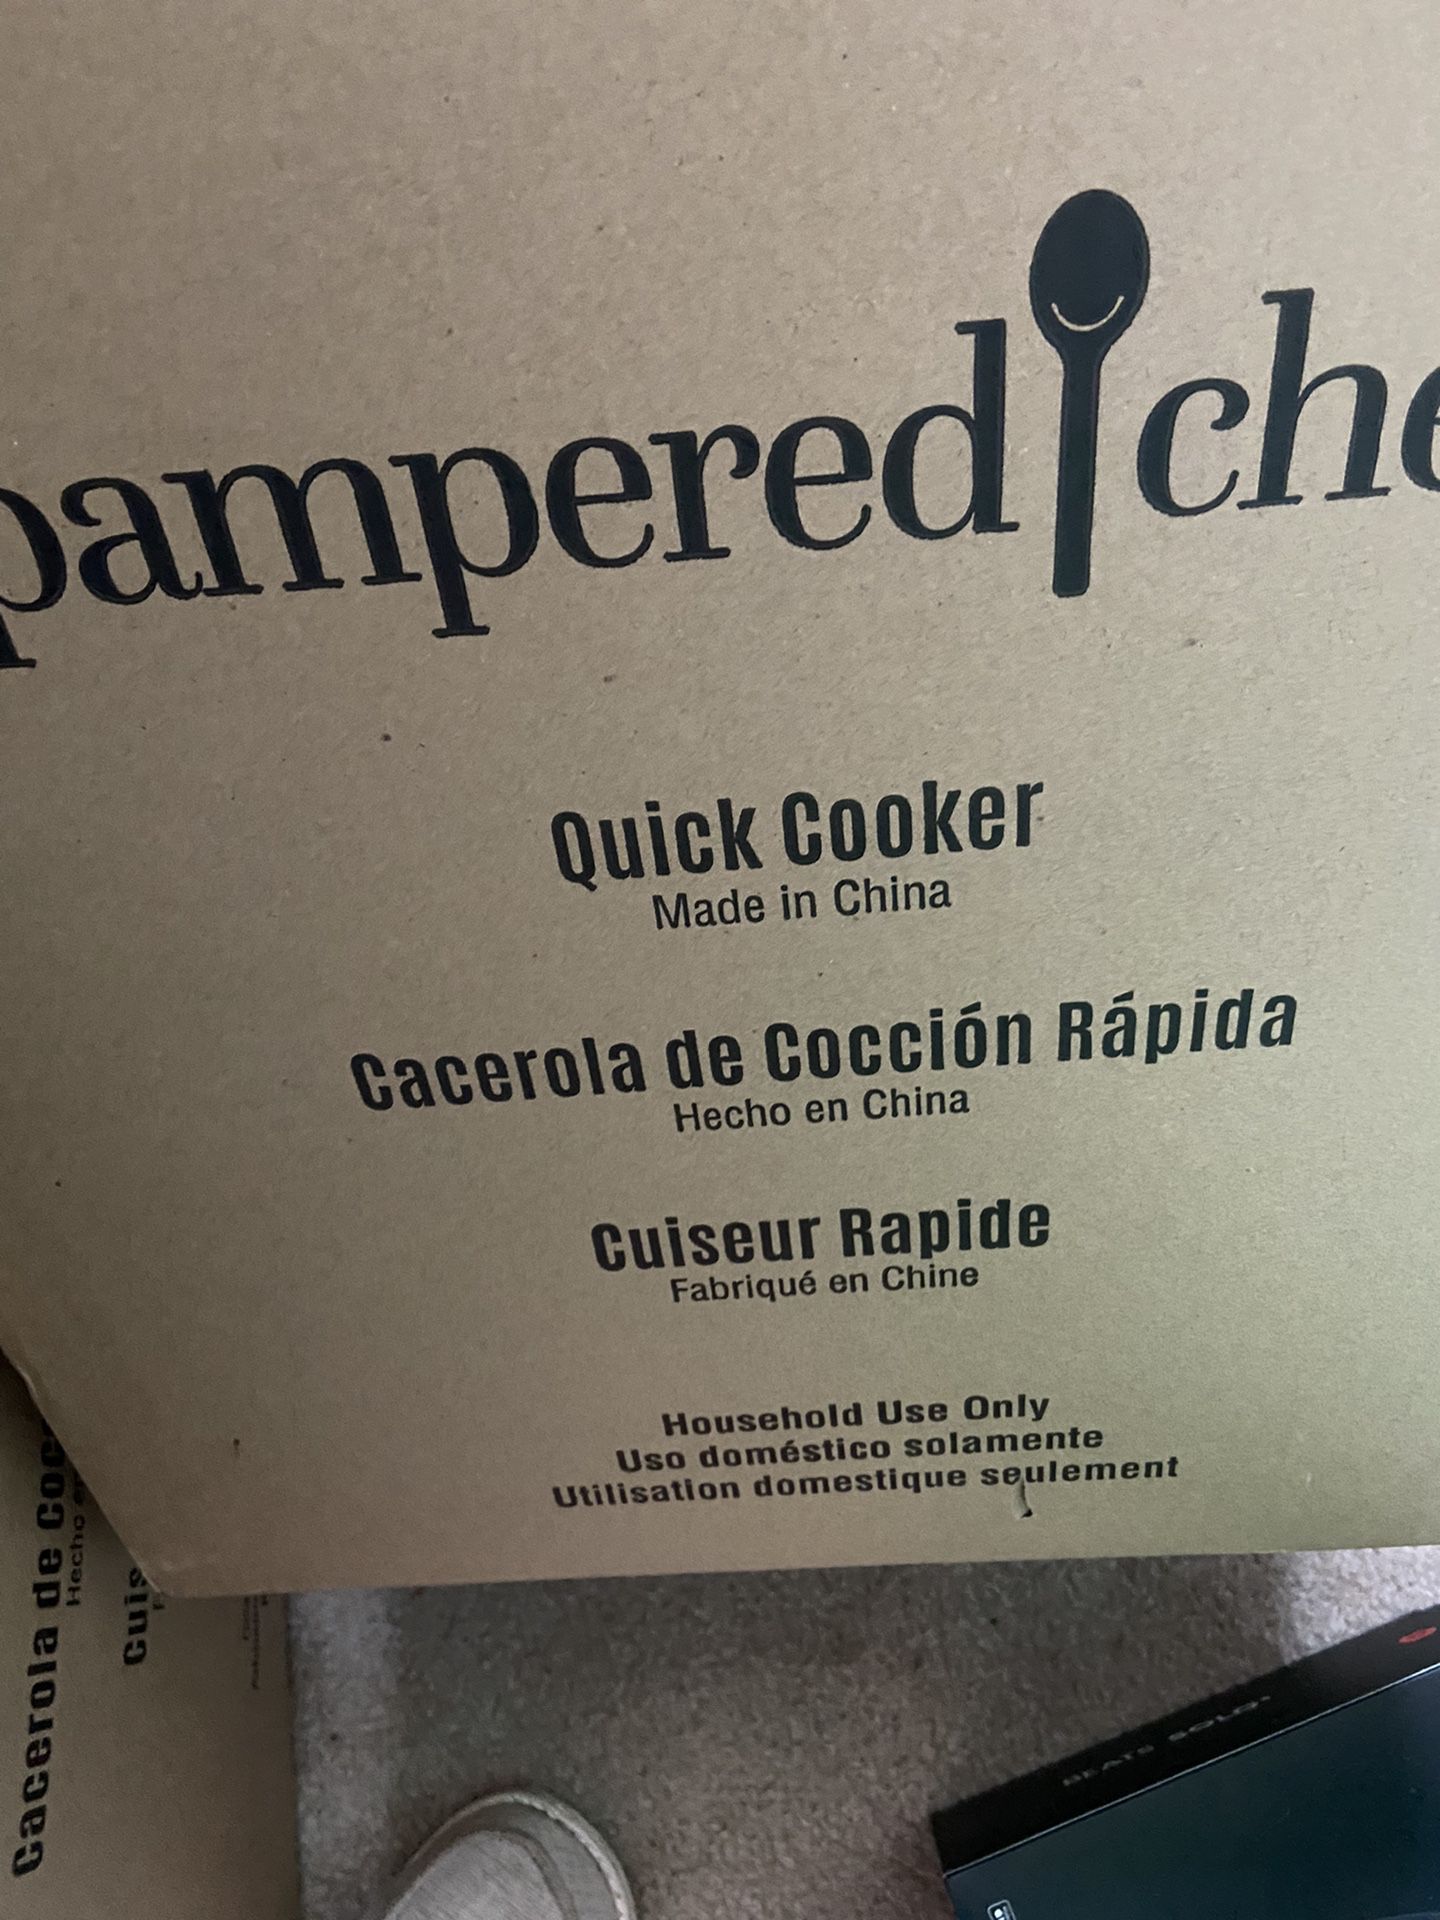 Pampered Chef Quick Cooker 